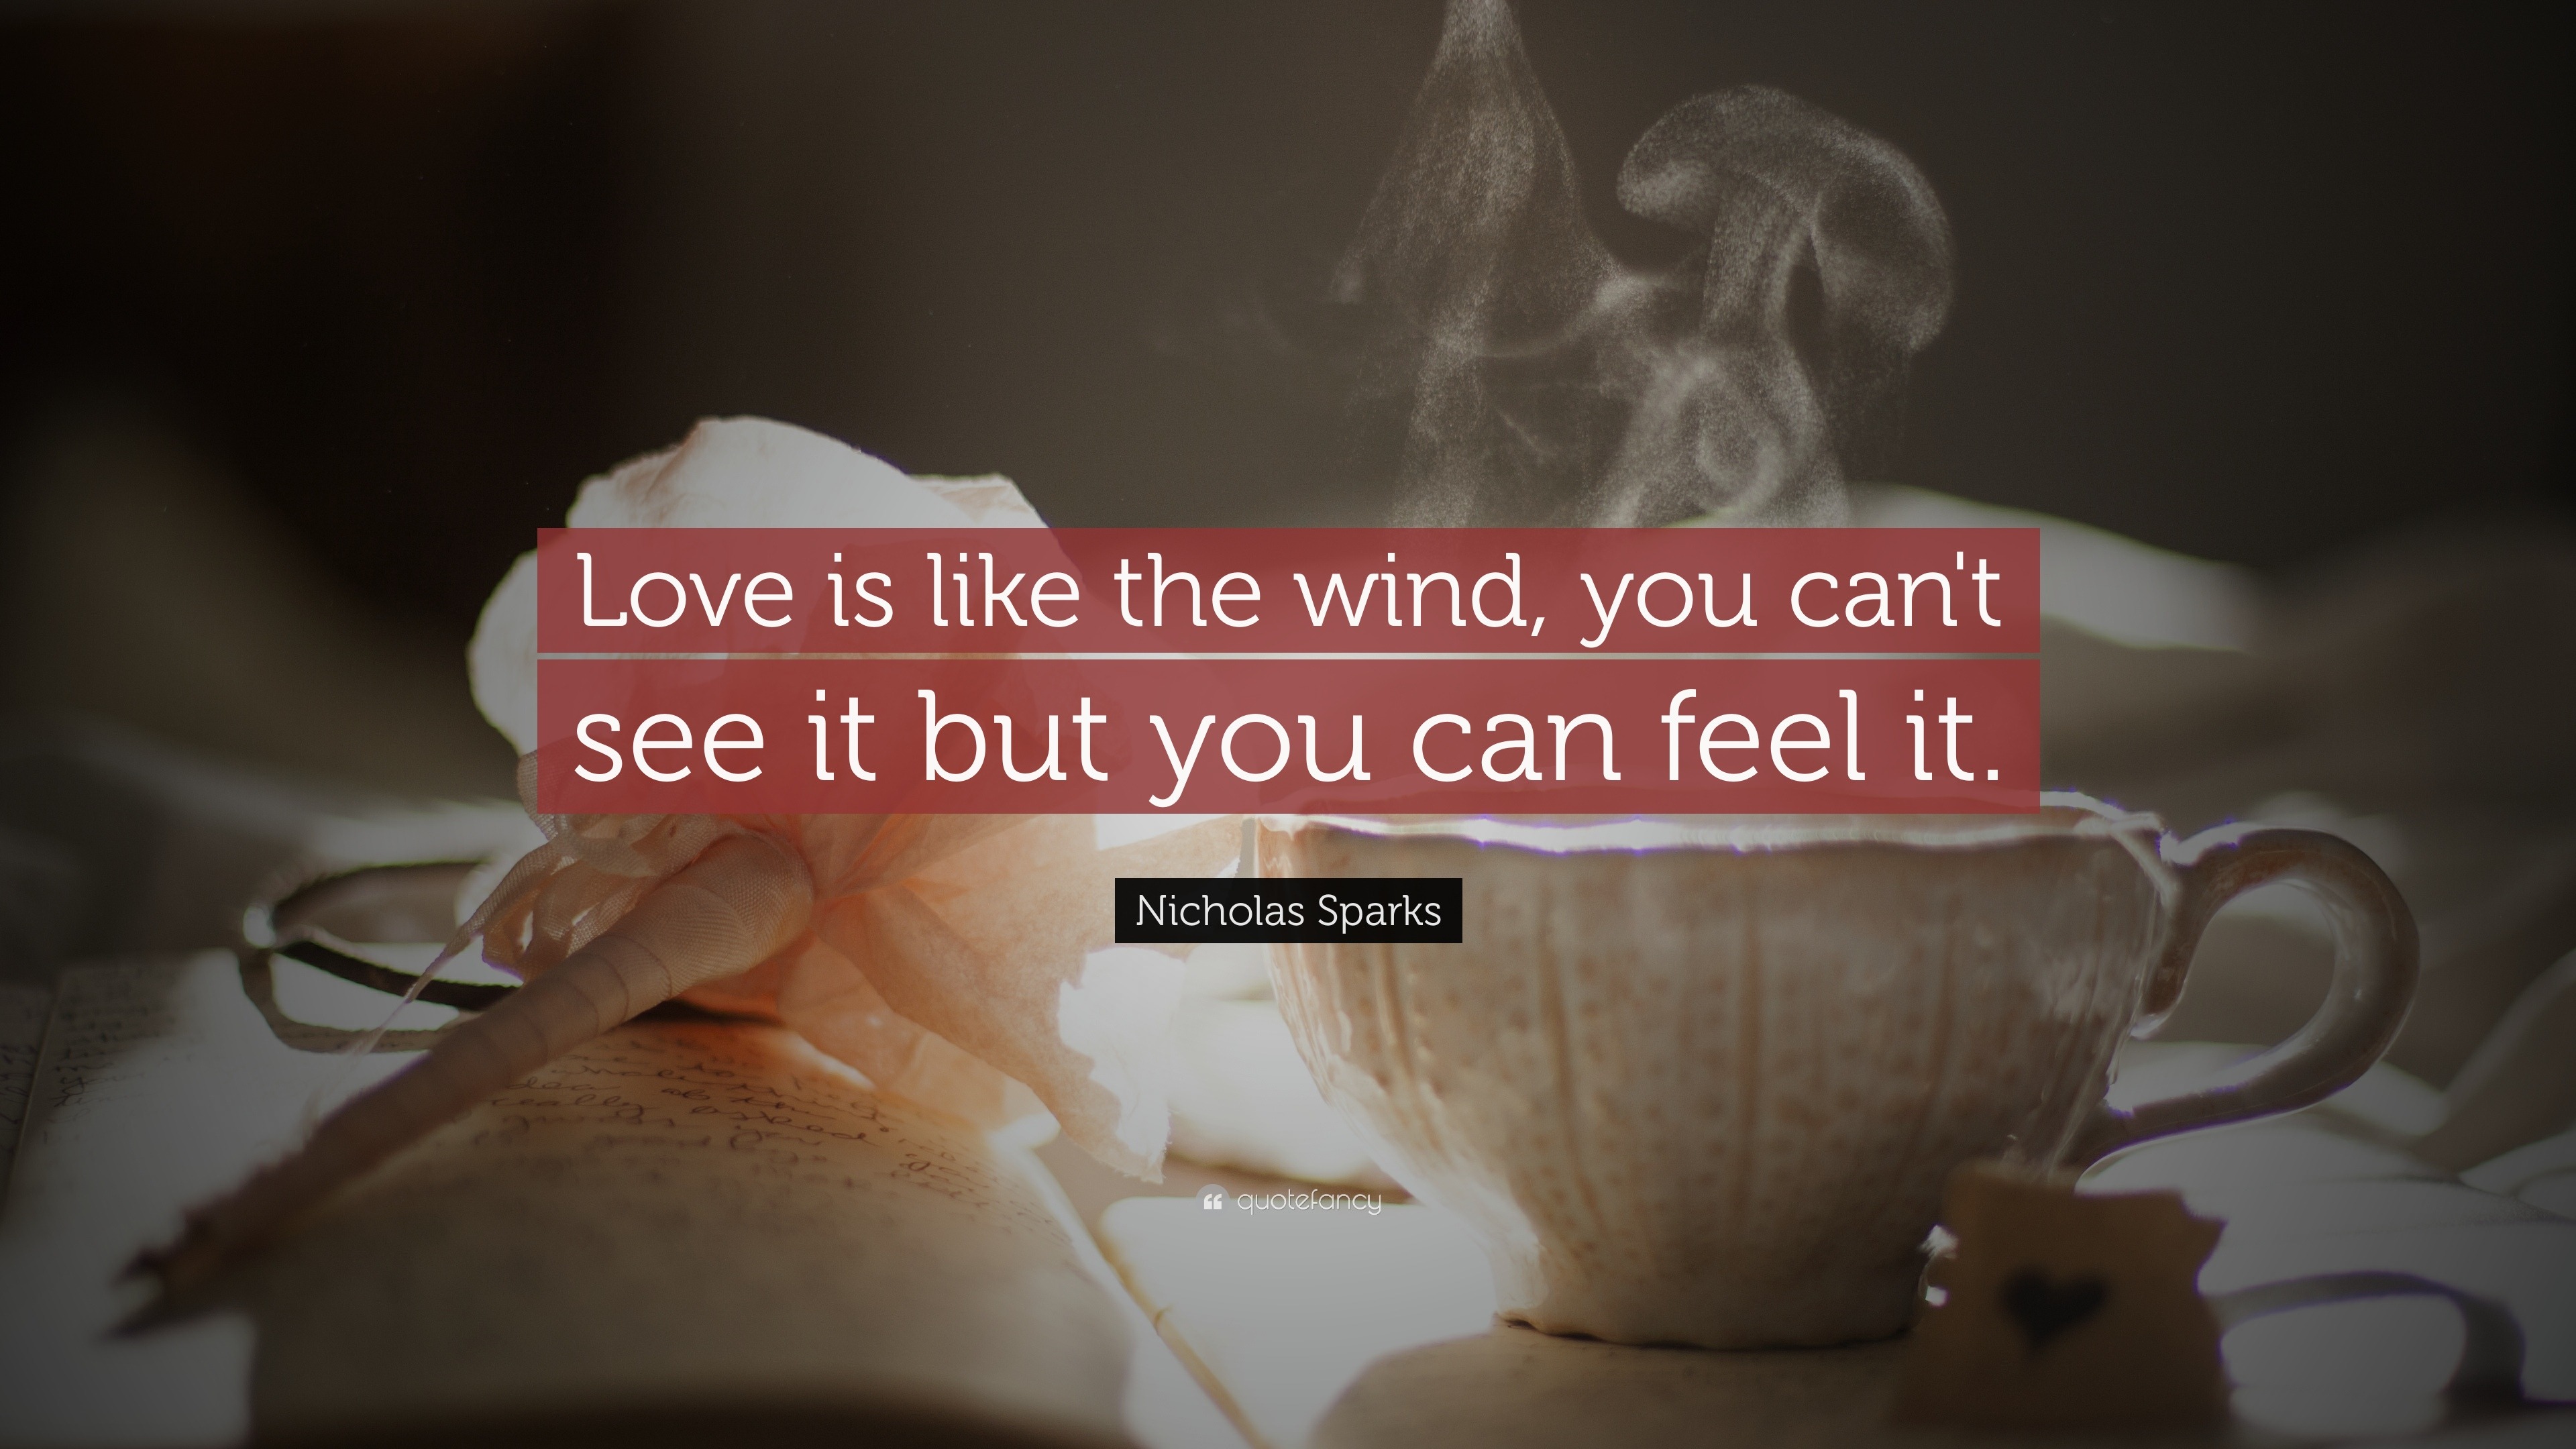 Nicholas Sparks Quote “Love is like the wind you can t see